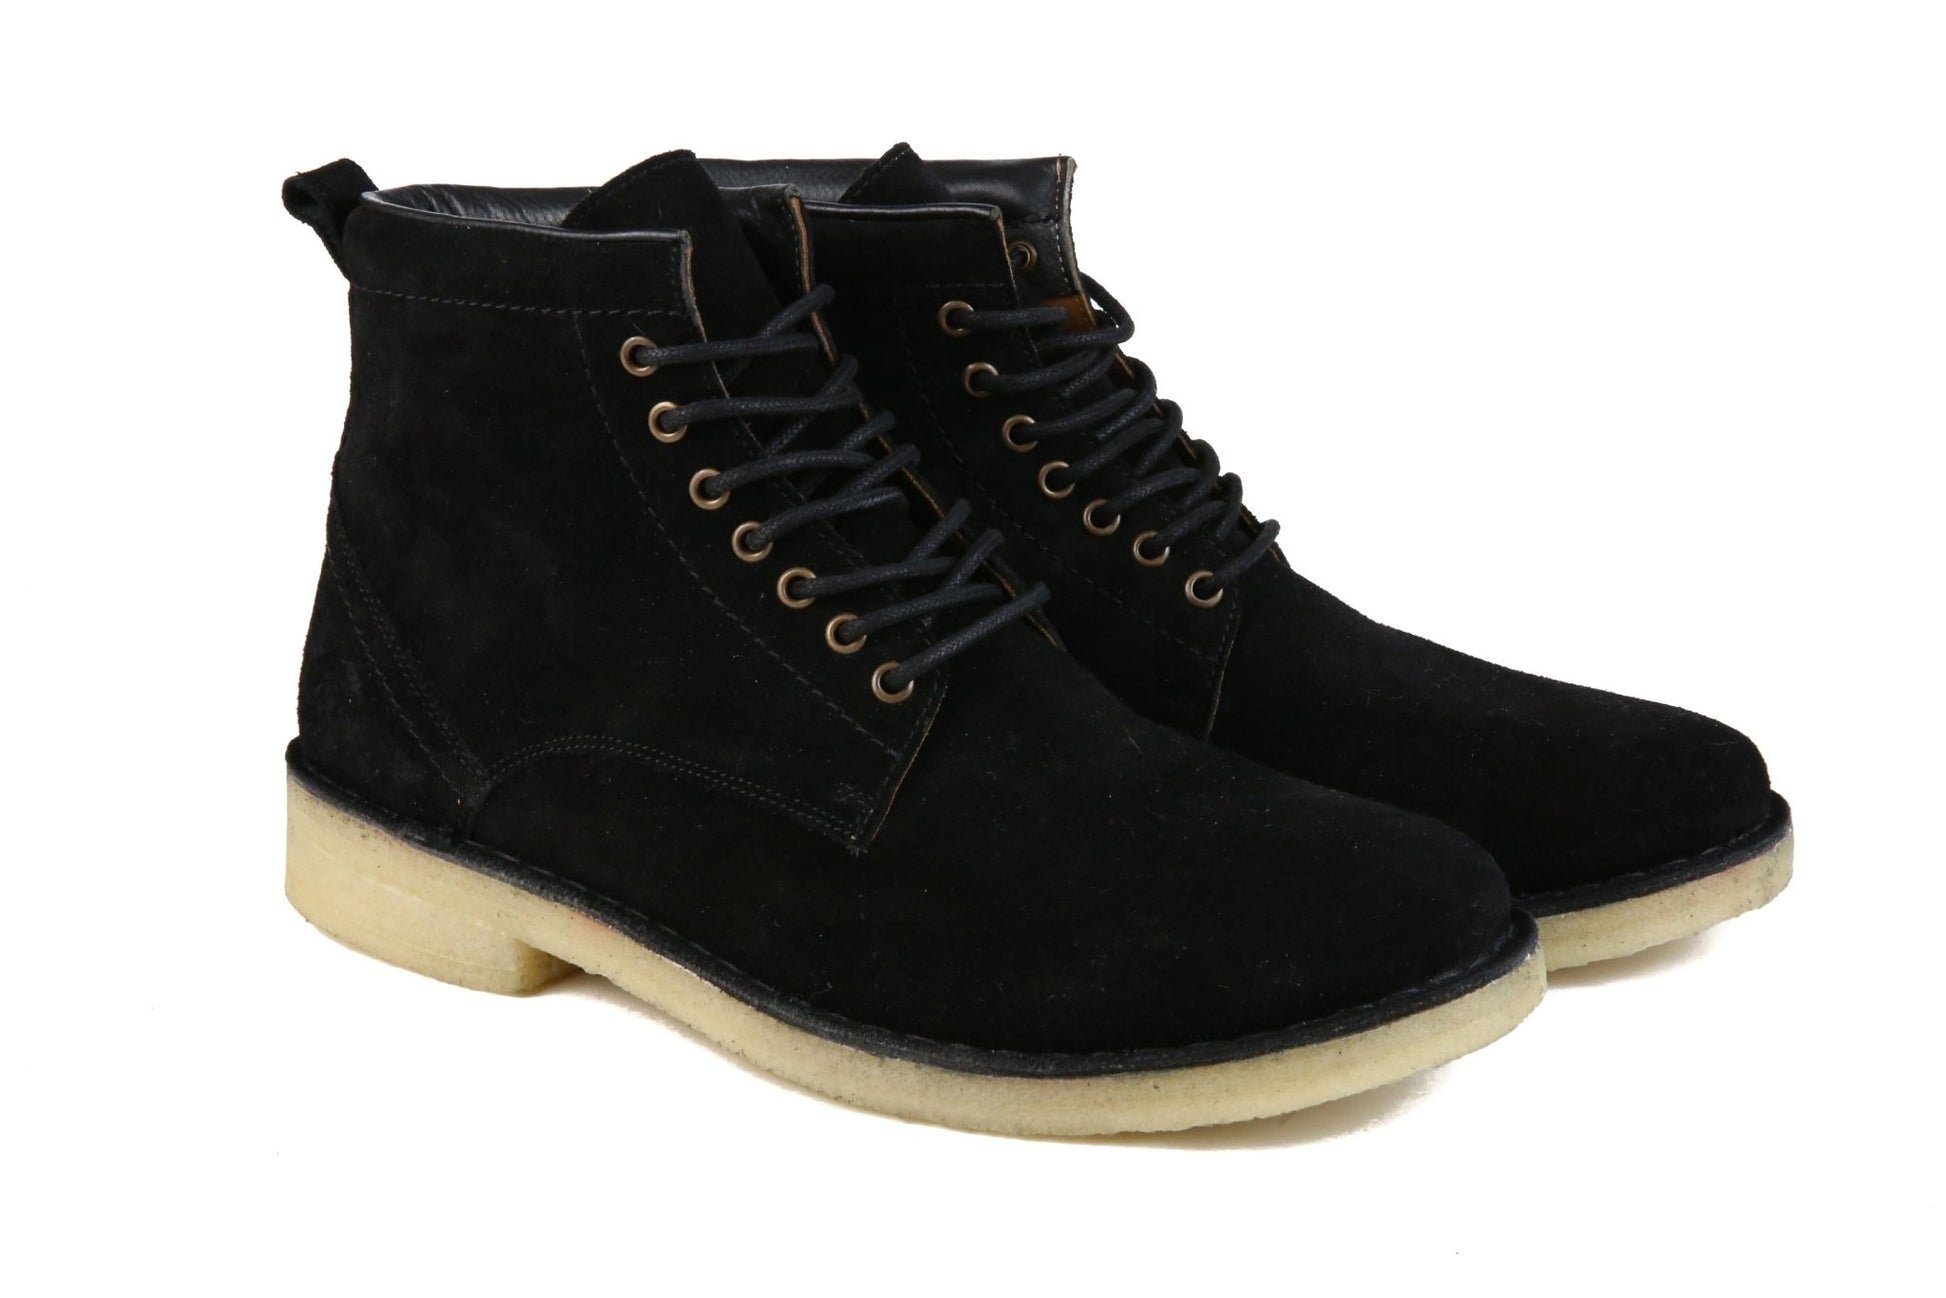 Hound & Hammer The Hunter | Black Ankle Boots for Men - Men - Footwear - Boots - Ankle Boots - Benn~Burry